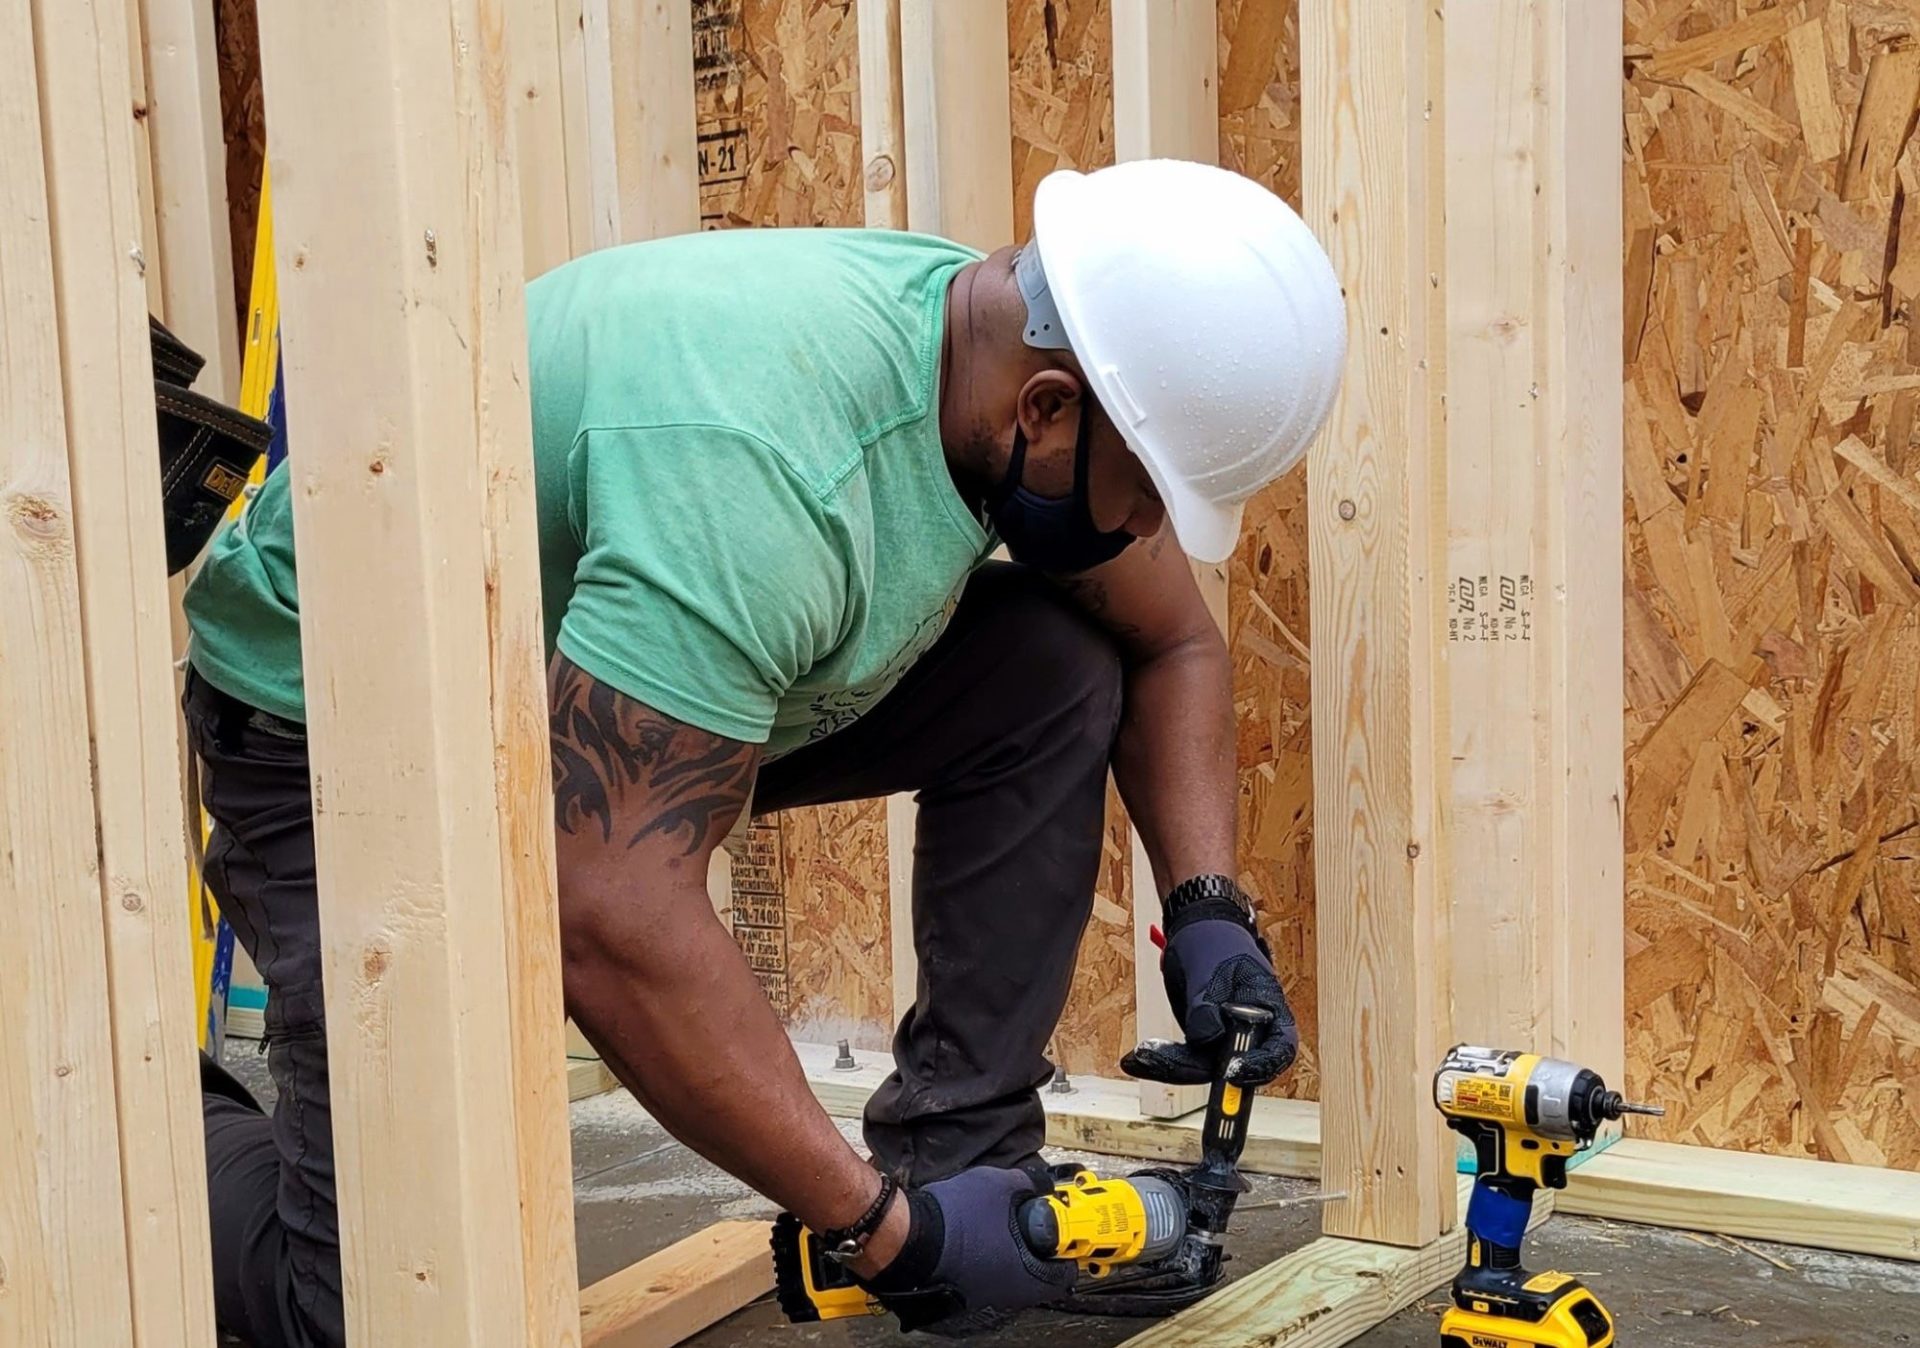 A Black man in a mint green shirt and white construction helmet is crouched down, hammering a nail.